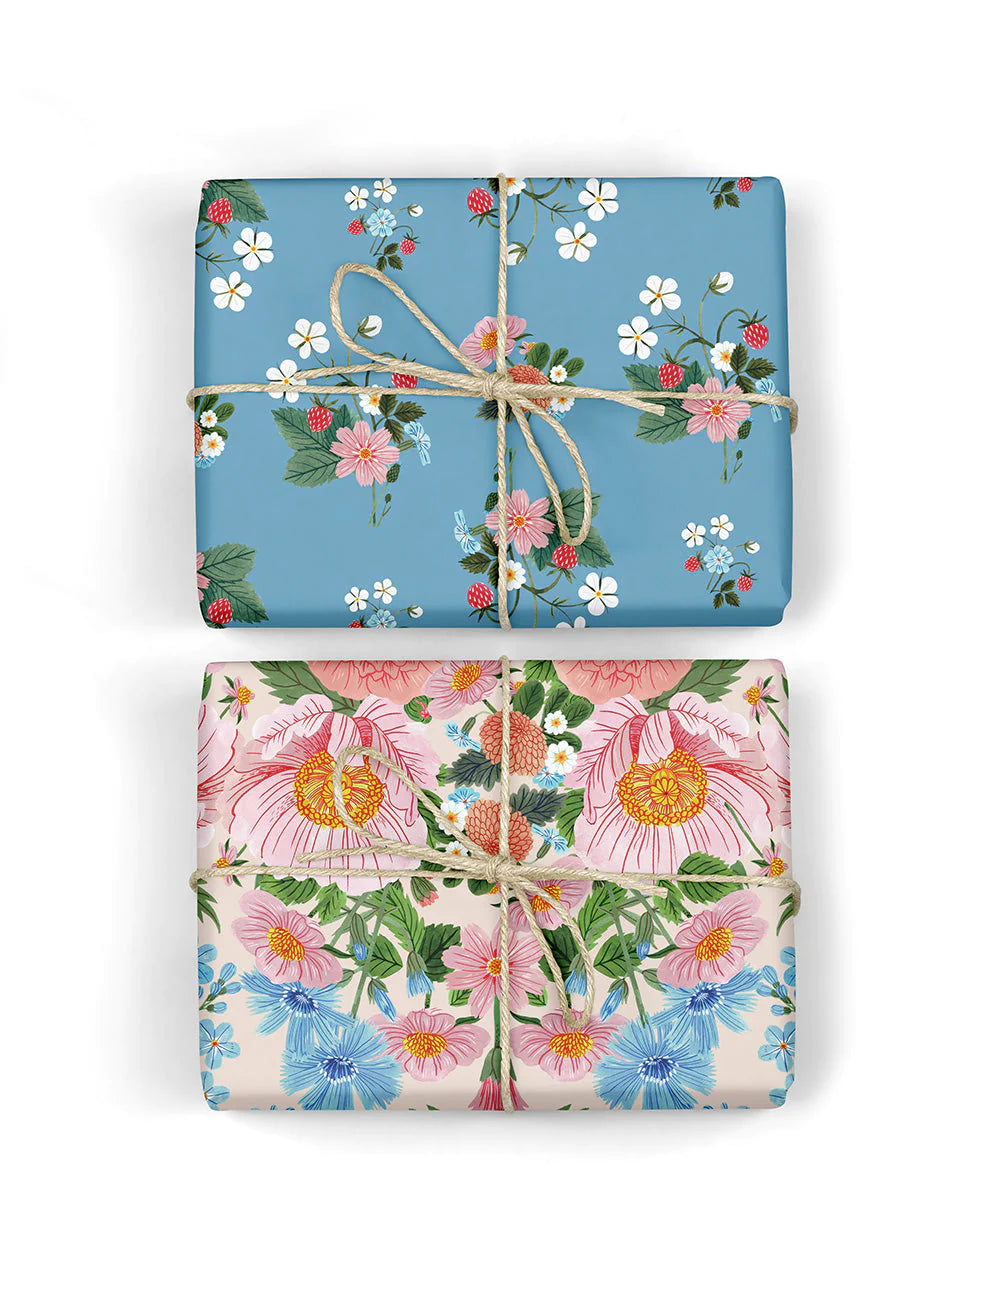 Folk Garden Party / Strawberries Double Sided Gift Wrap